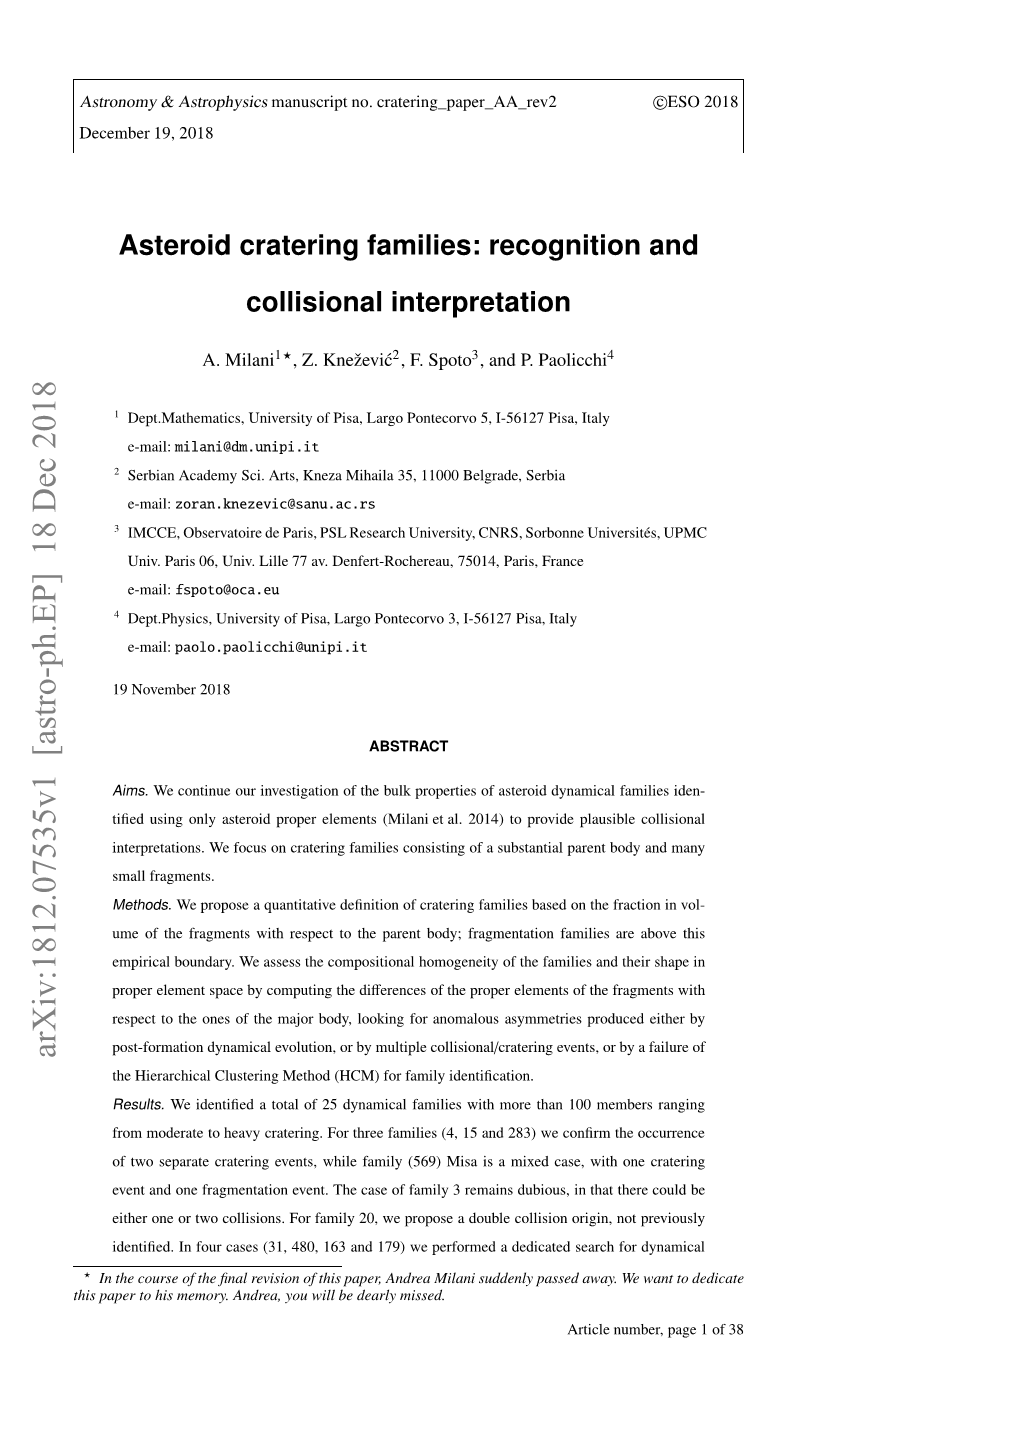 Asteroid Cratering Families: Recognition and Collisional Interpretation